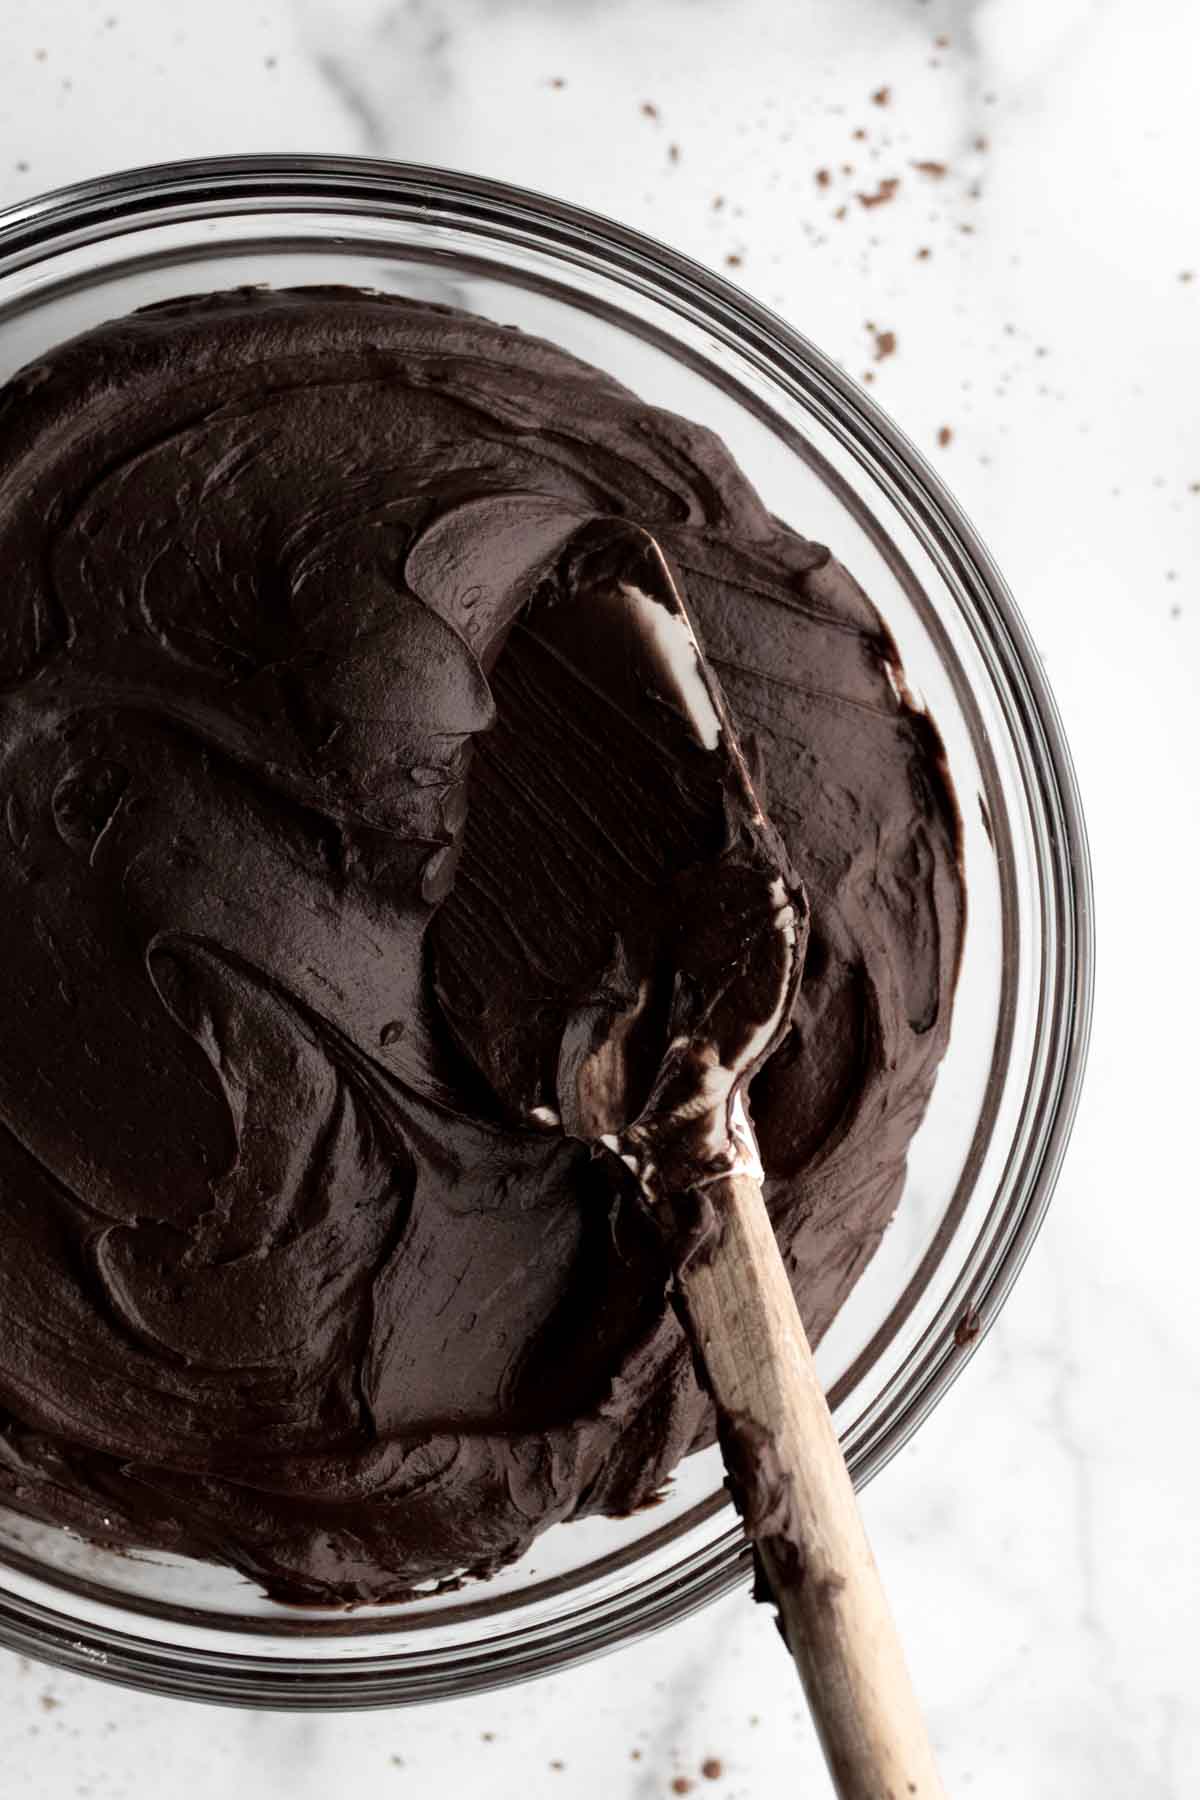 A look at the creamy chocolate frosting in a bowl.